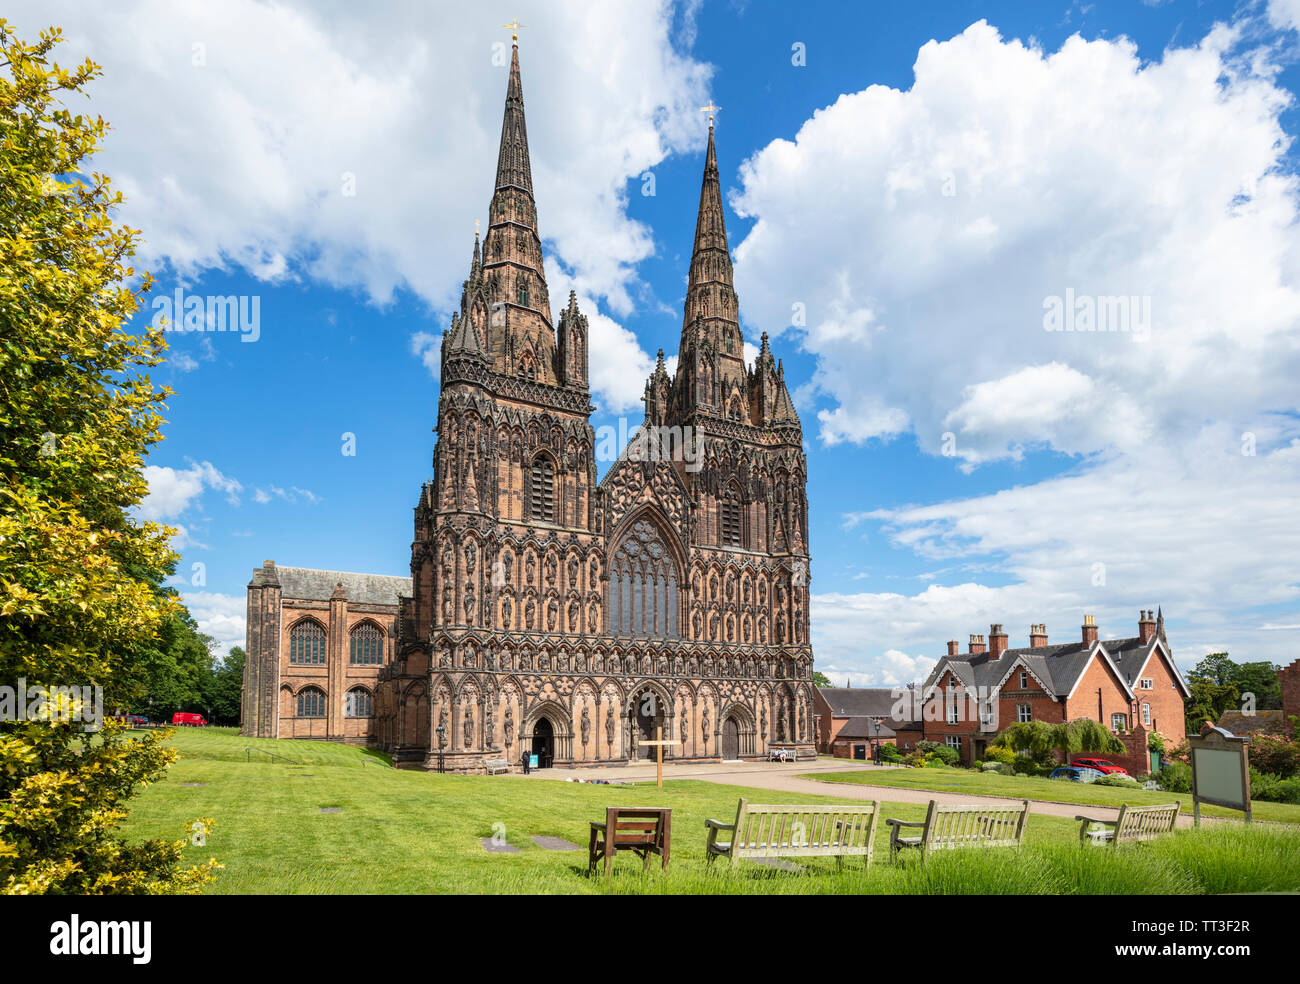 Lichfield cathedral Lichfield cathedral west front with carvings of St Chad saxon and norman kings Lichfield Staffordshire England UK GB Europe Stock Photo